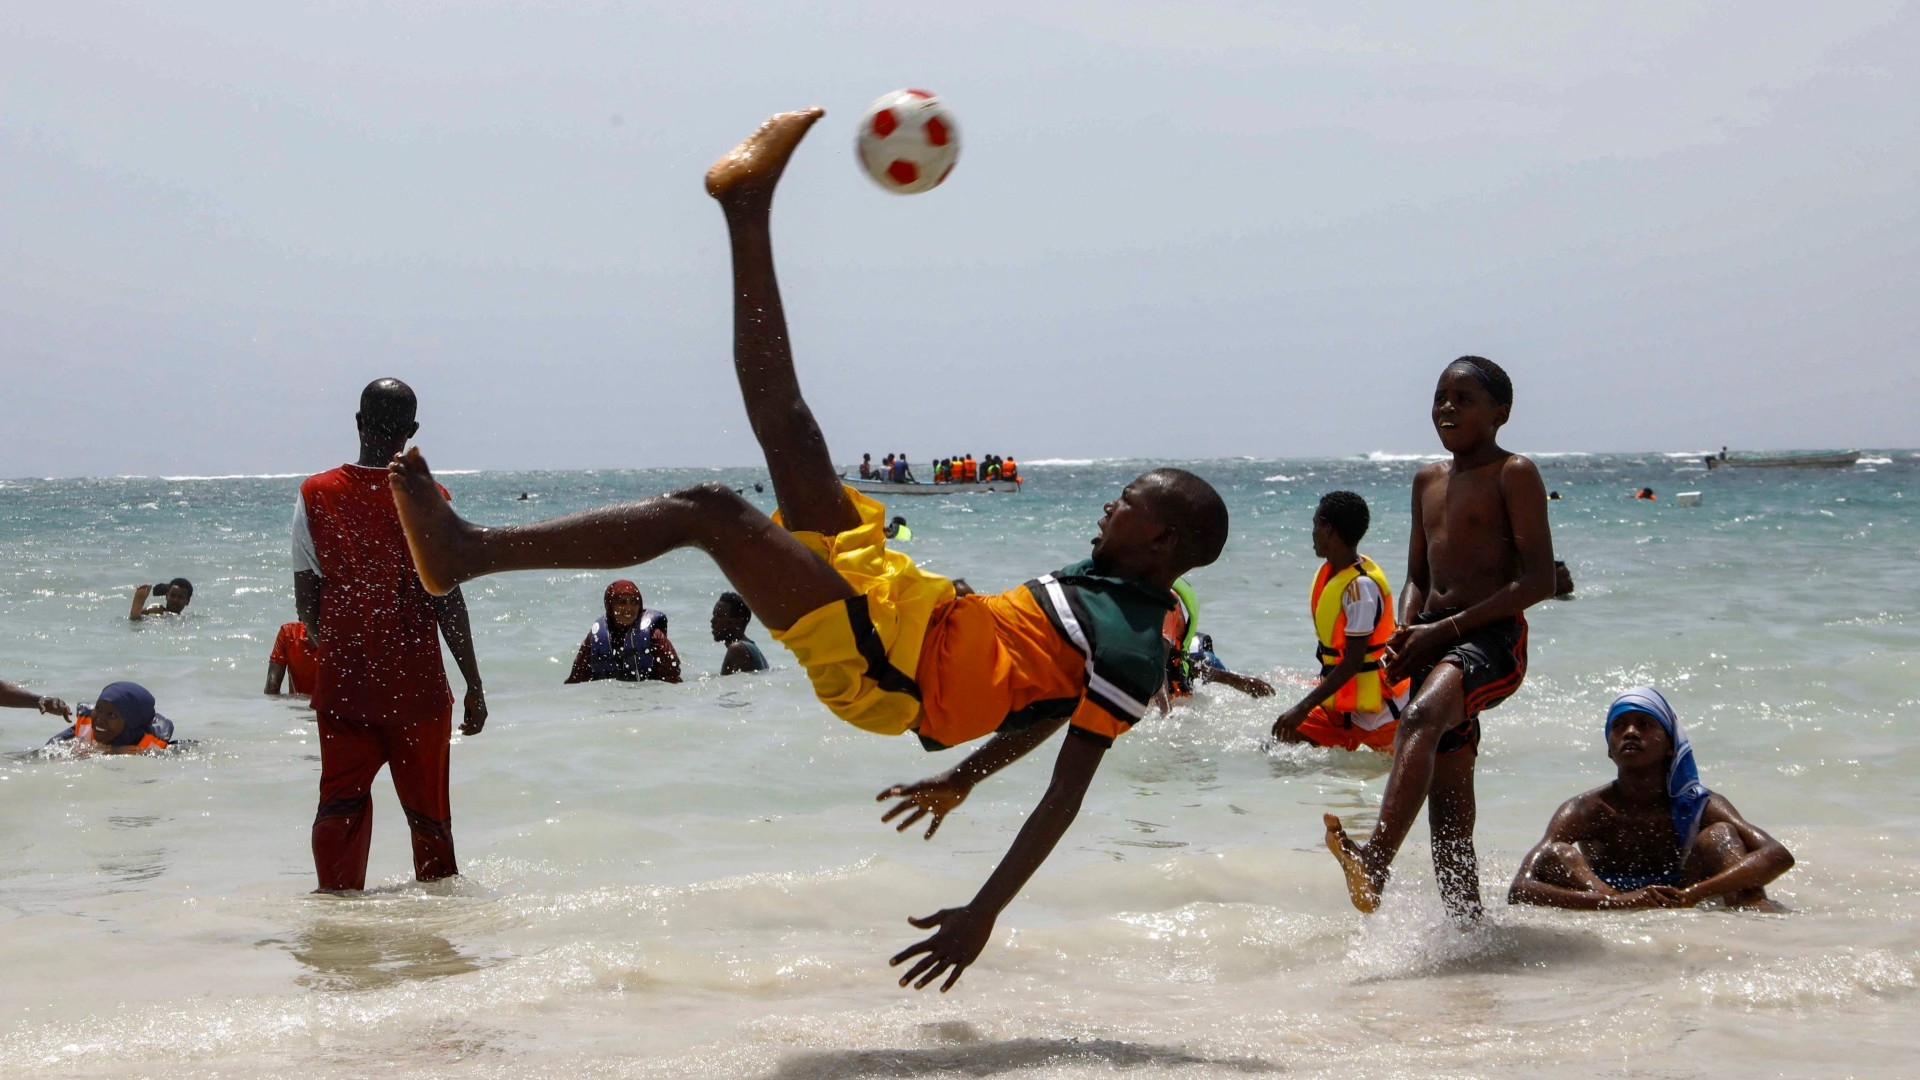 Youths play on a Mogadishu beach. More Turkish warships may soon be patrolling these waters (Reuters/Feisal Omar)